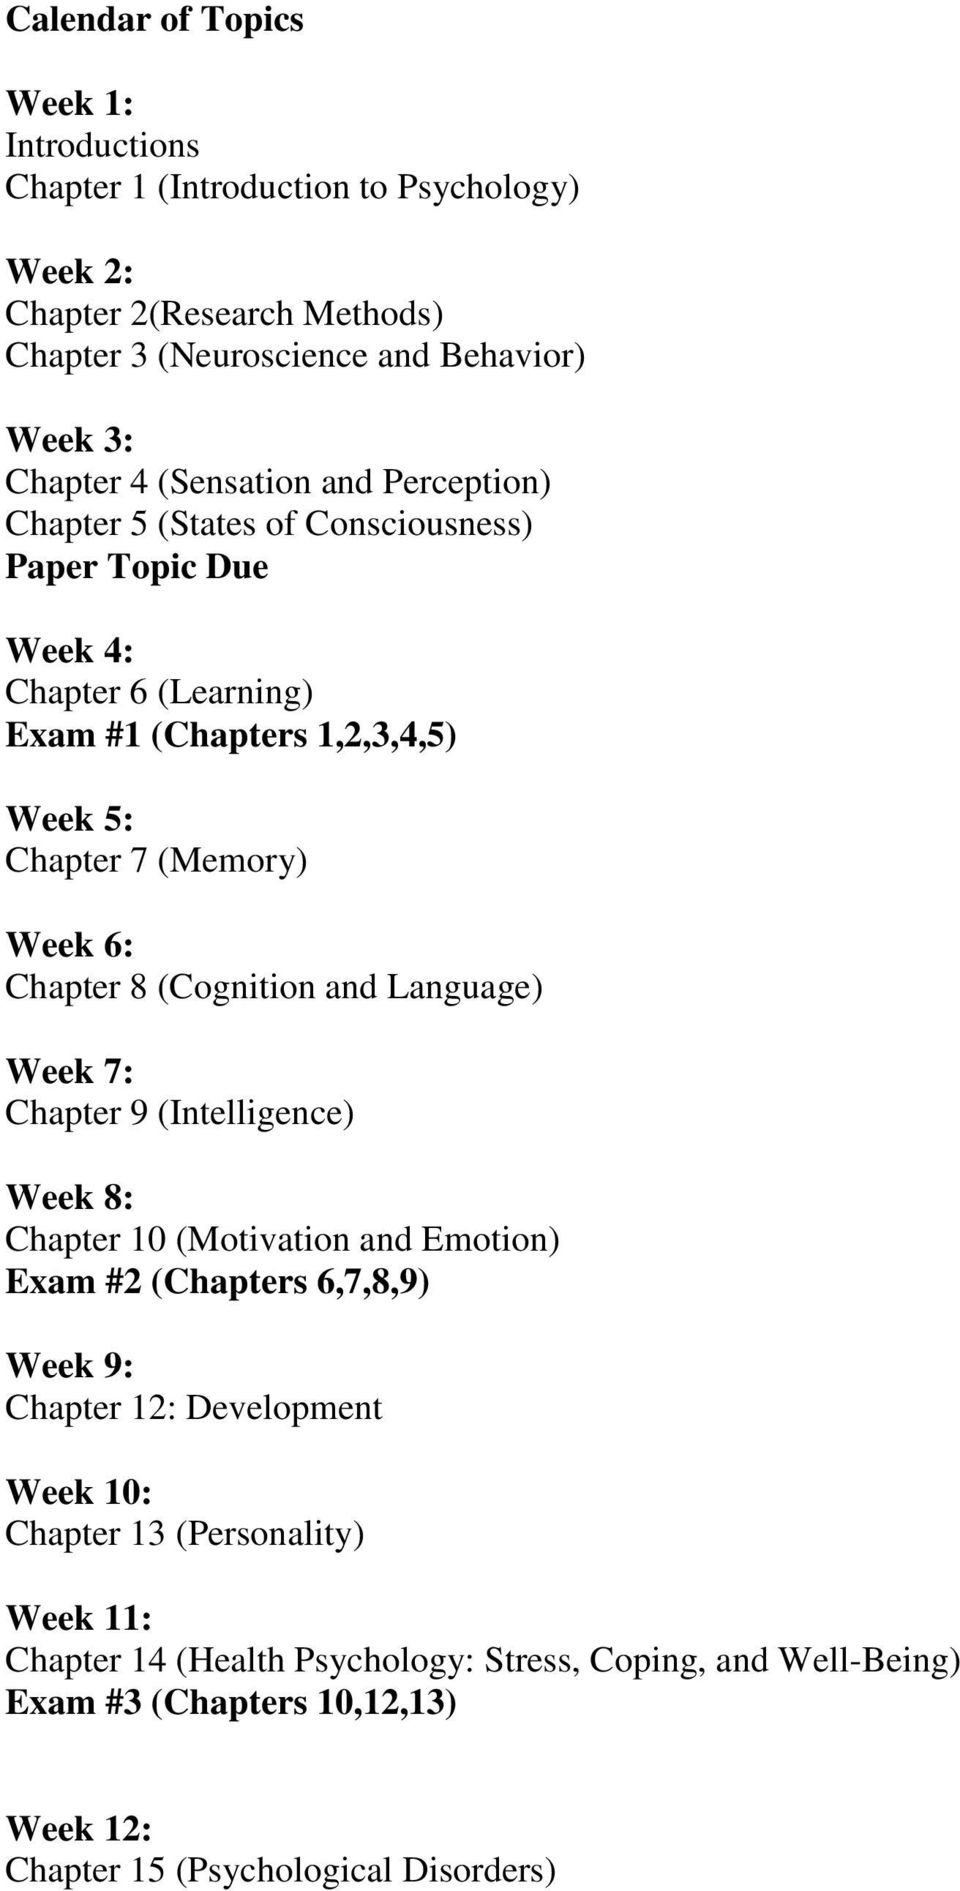 Chapter 8 (Cognition and Language) Week 7: Chapter 9 (Intelligence) Week 8: Chapter 10 (Motivation and Emotion) Exam #2 (Chapters 6,7,8,9) Week 9: Chapter 12: Development